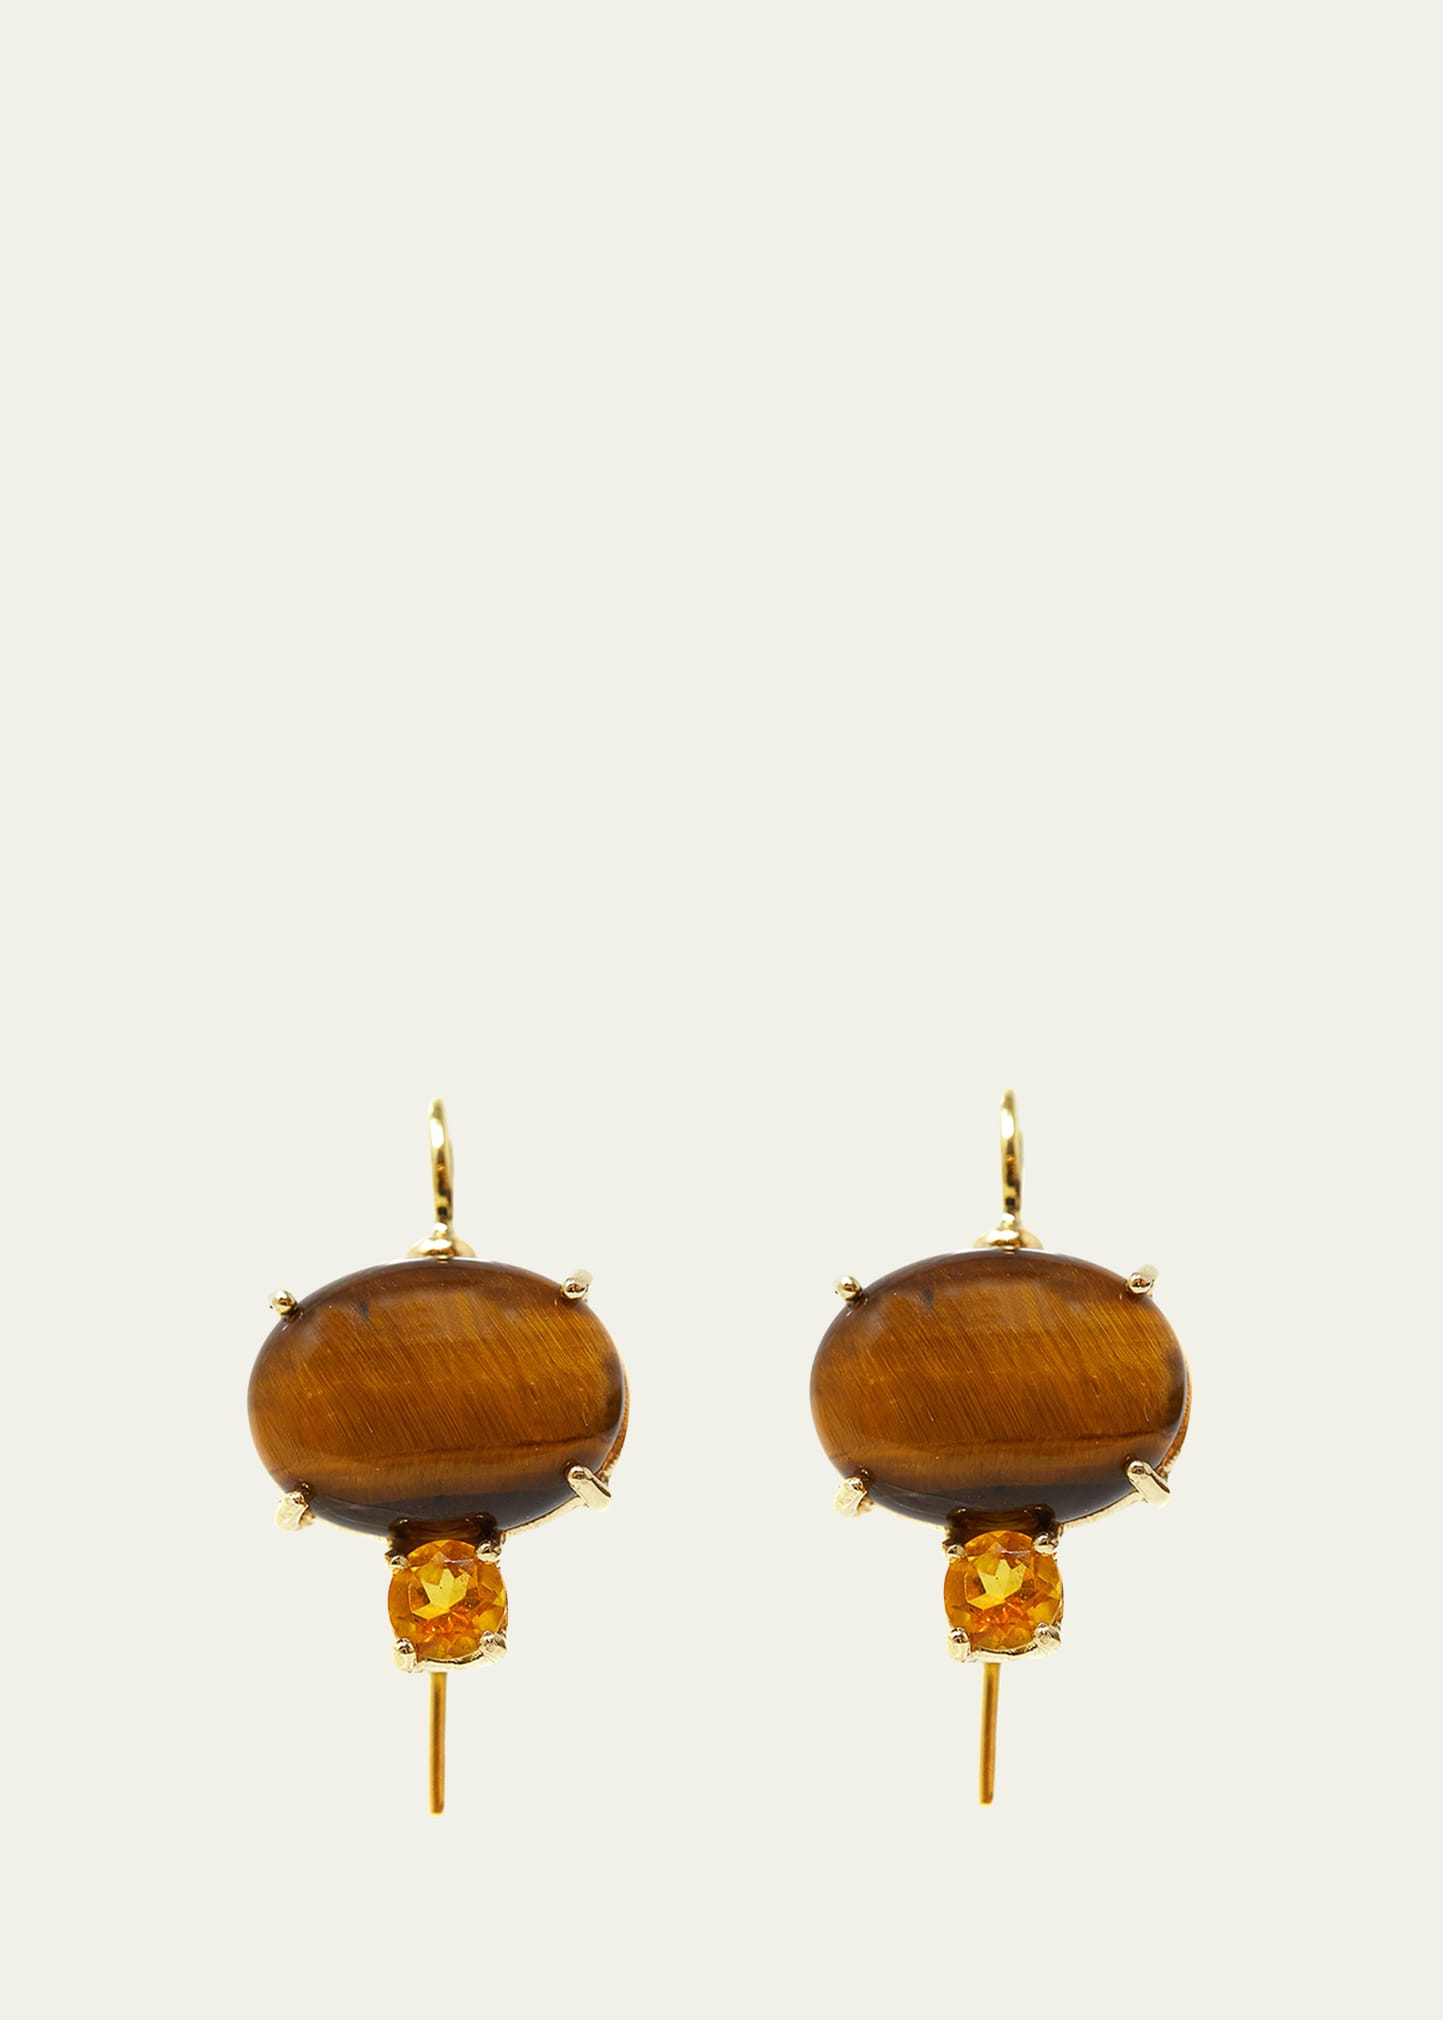 Grazia And Marica Vozza 18k Yellow Gold Monachina Stone Hook Earrings With Tiger Eye And Citrine Quartz In Yg